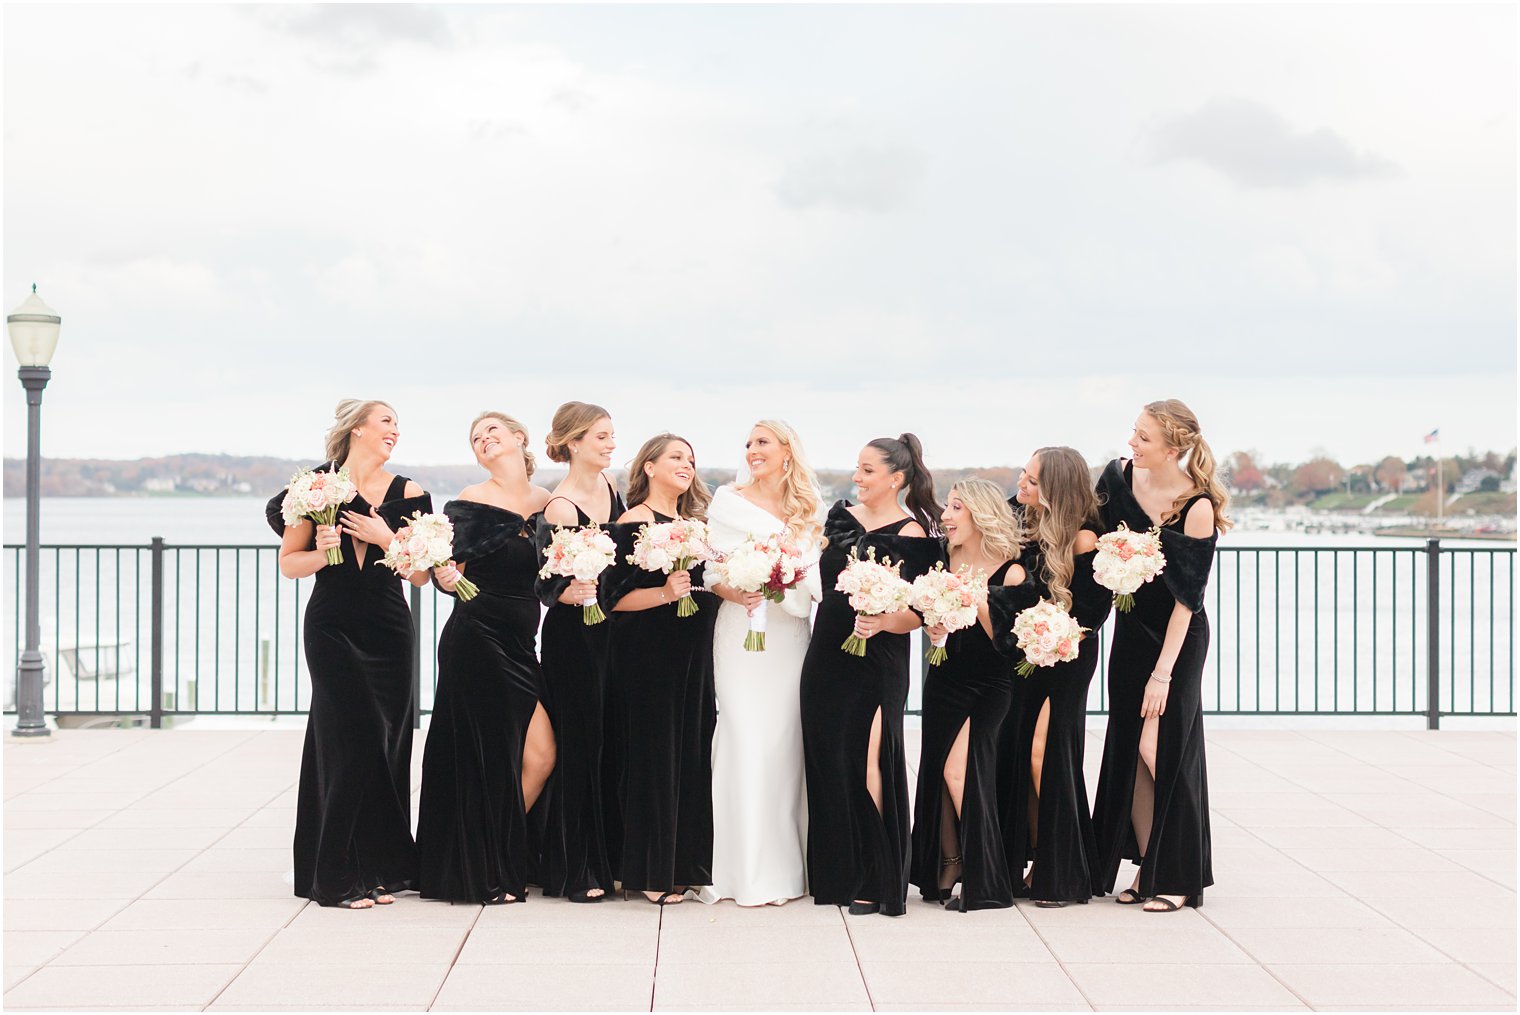 bride smiles at bridesmaids in all black dresses on the patio at the Molly Pitcher Inn